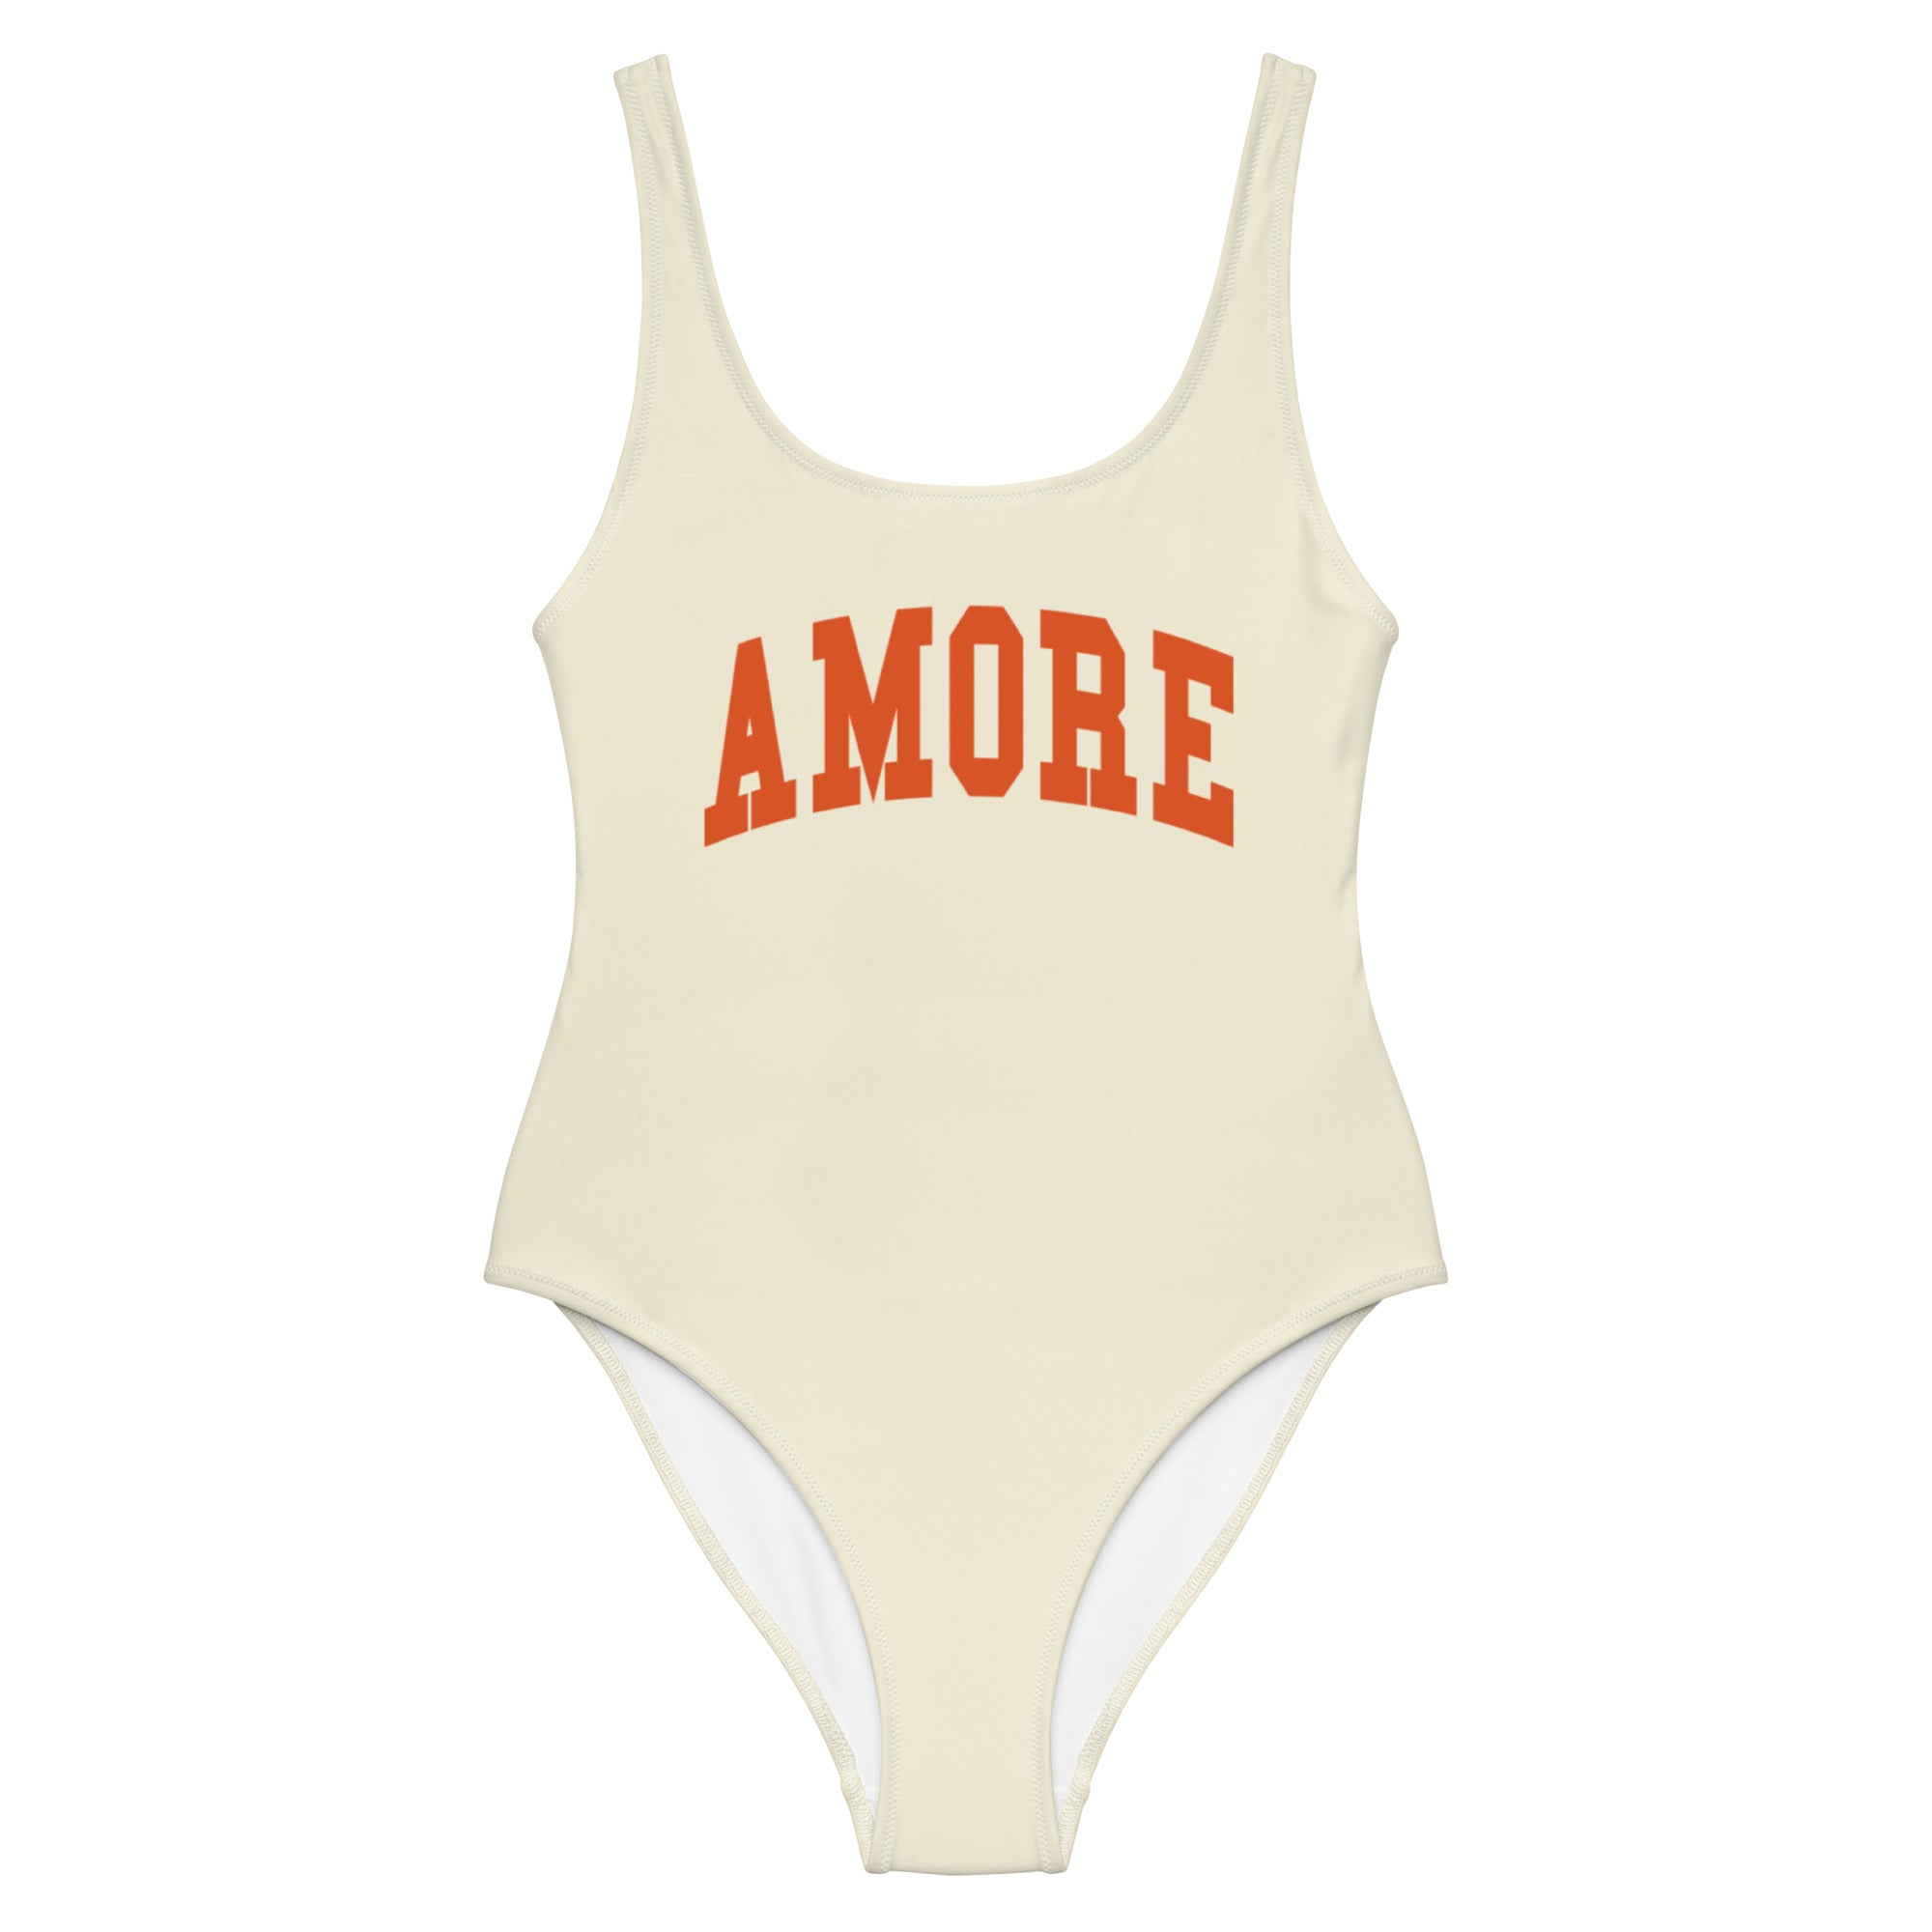 Amore - Swimsuit - The Refined Spirit